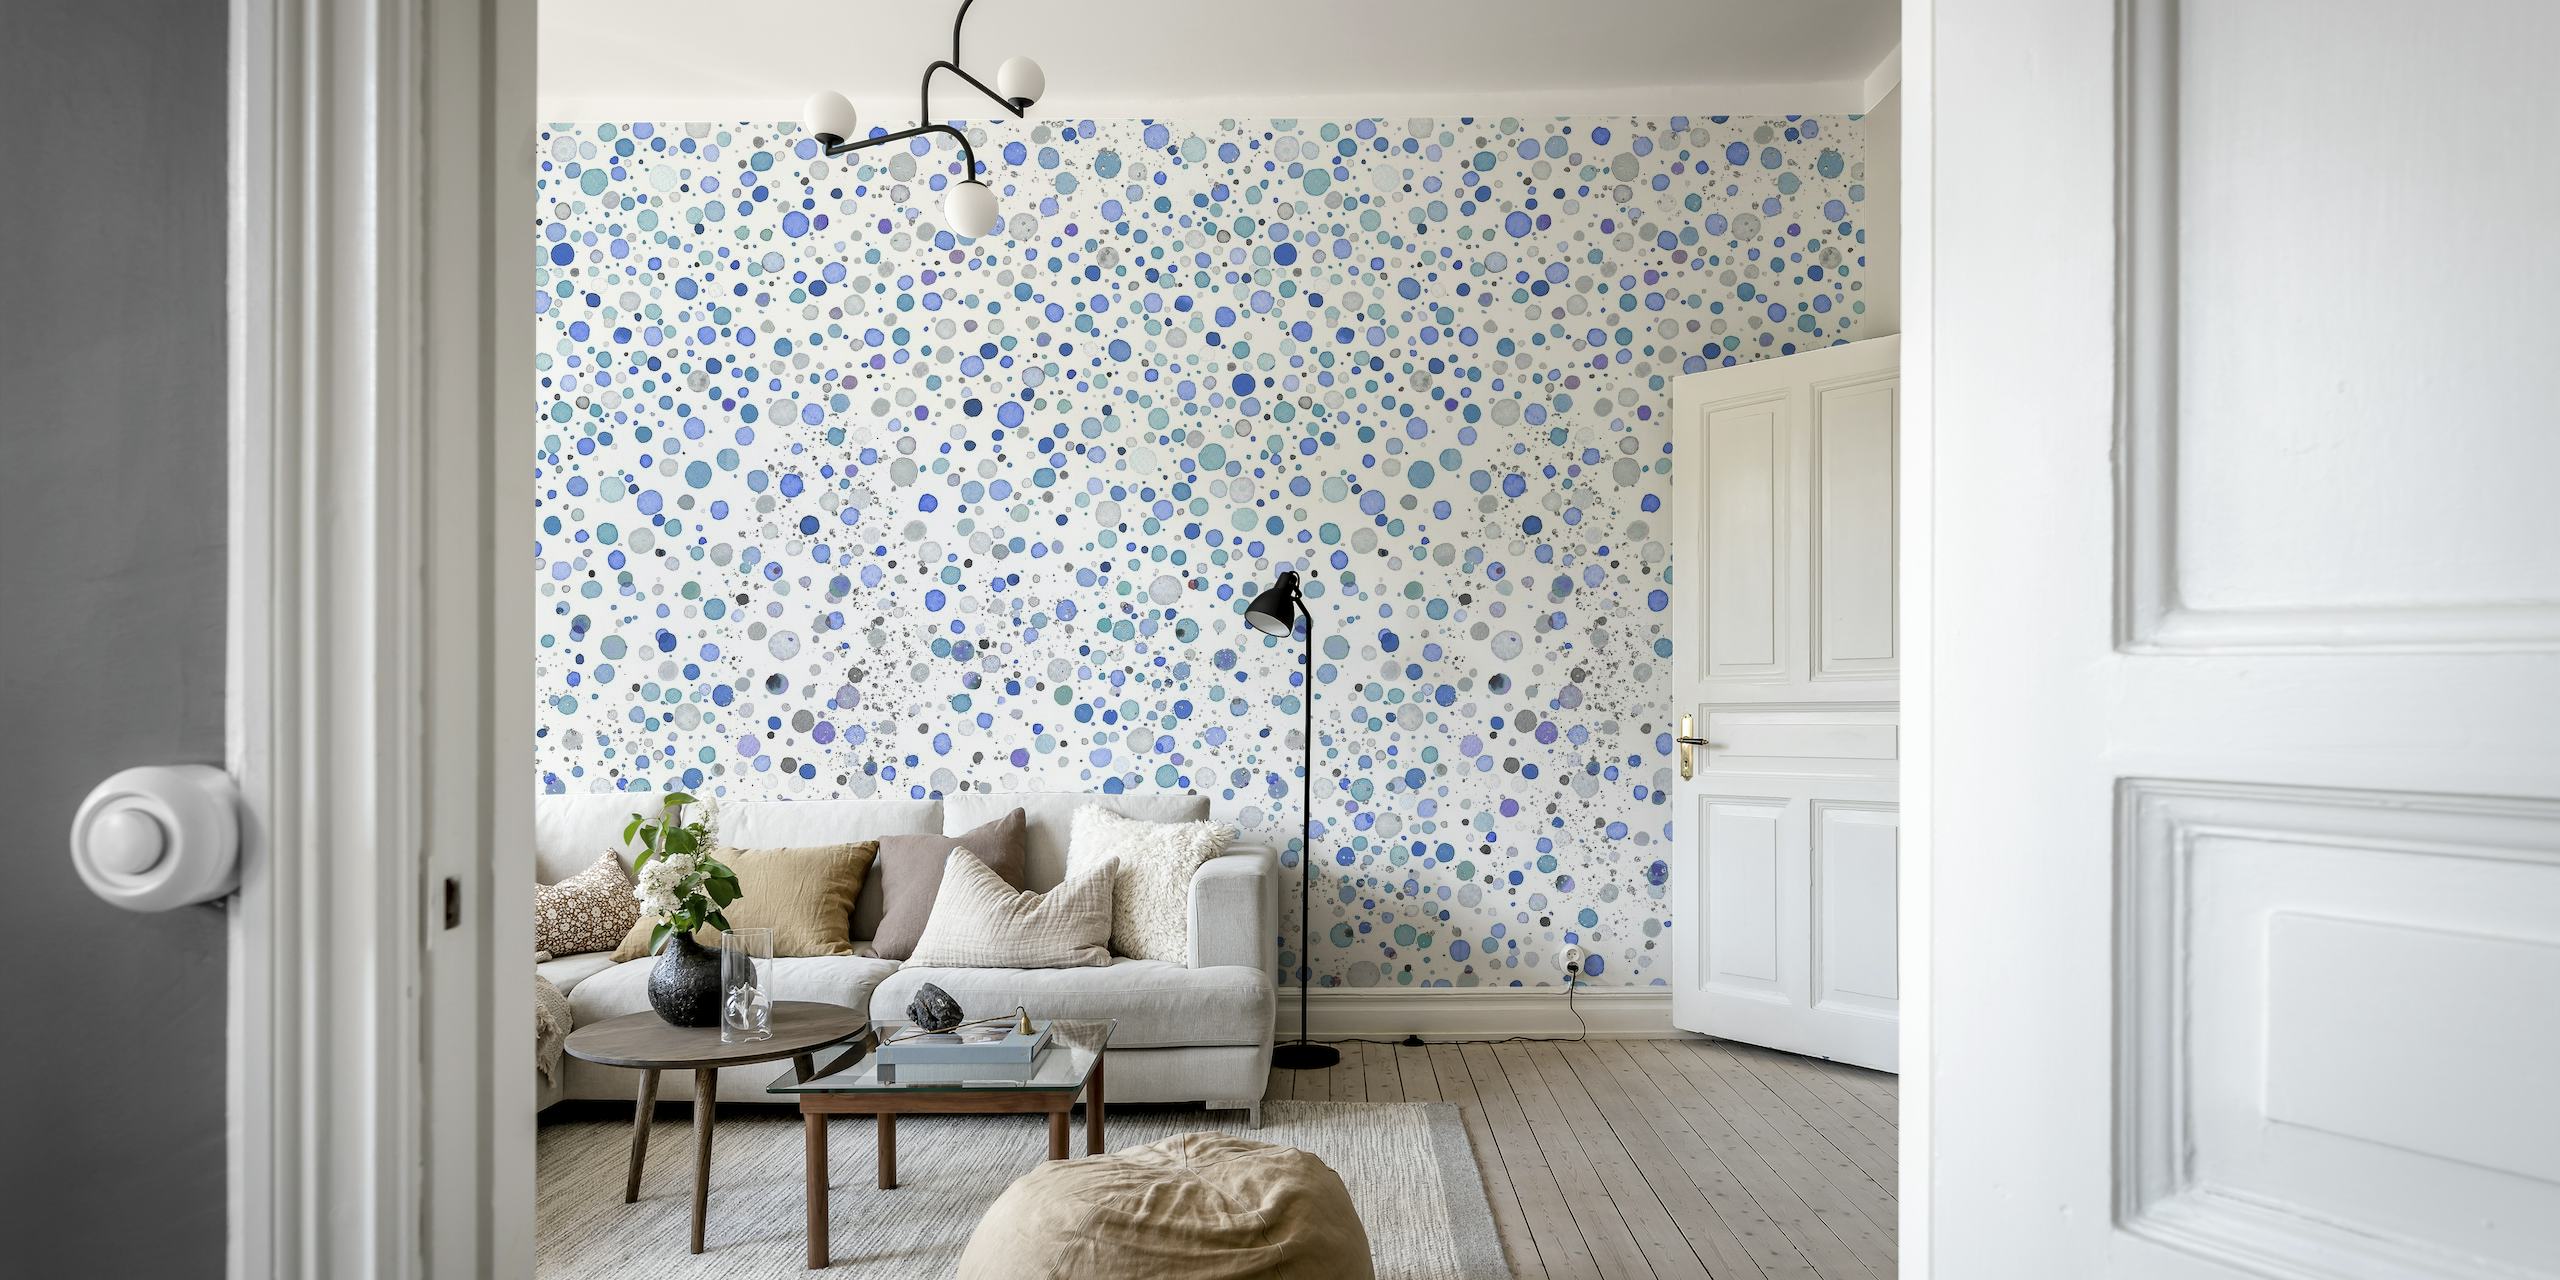 Abstract confetti dots pattern in shades of blue and indigo on a wall mural